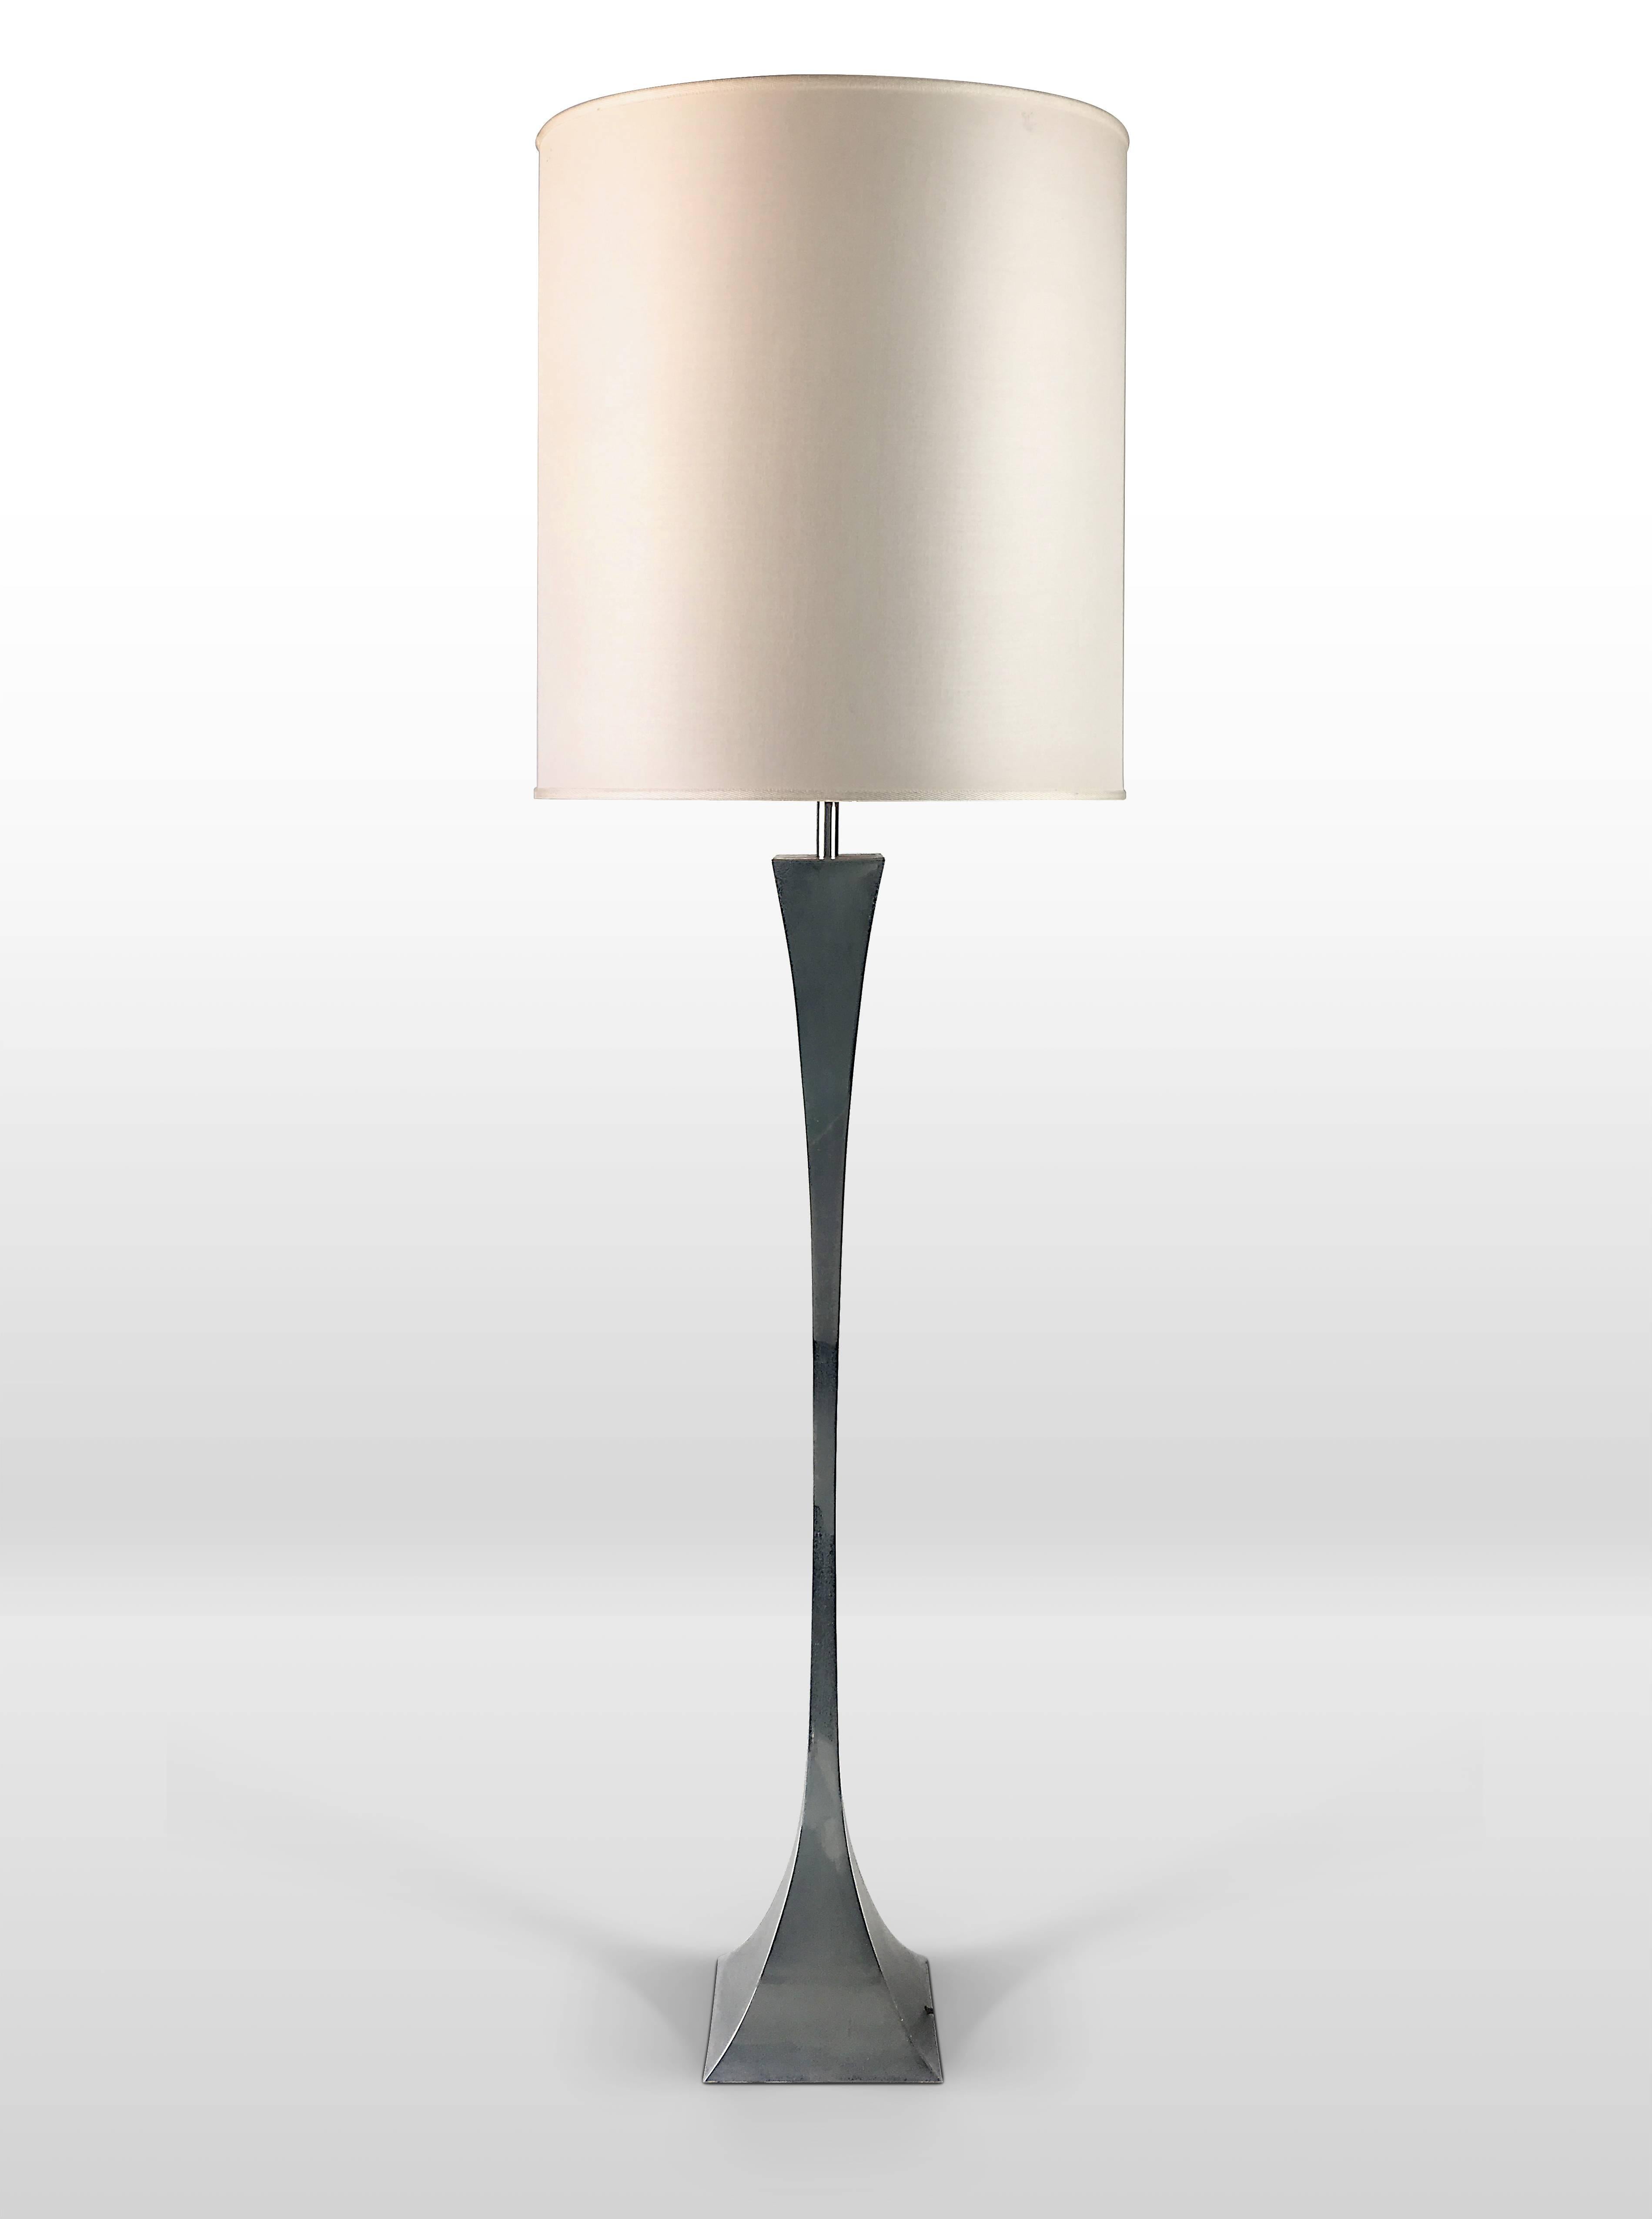 Modern Chromed Floor Lamp by Montagna Grillo and A. Tonello